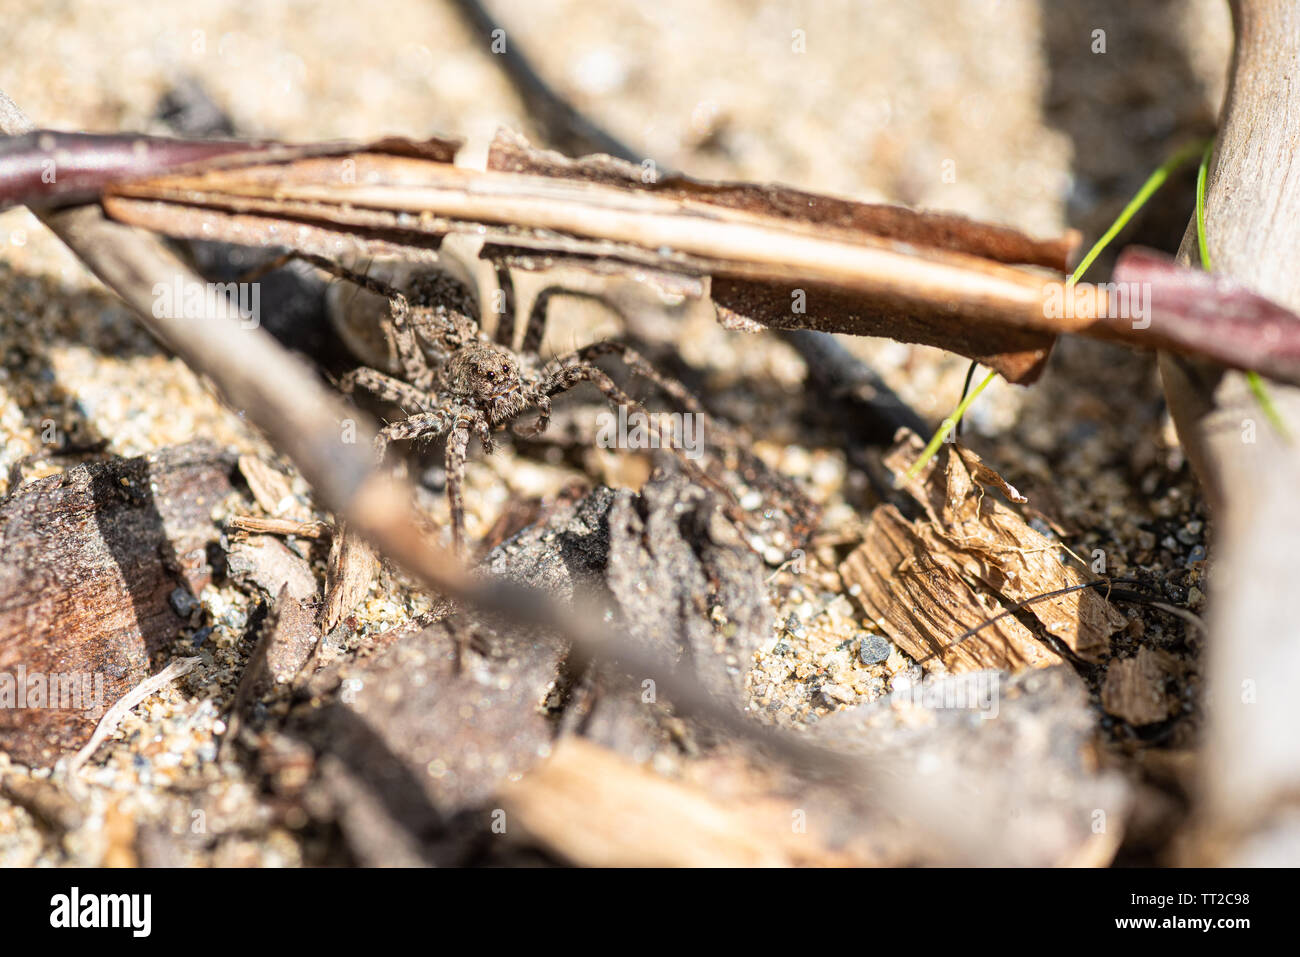 Running crab spider spotted amongst leaf litter Stock Photo